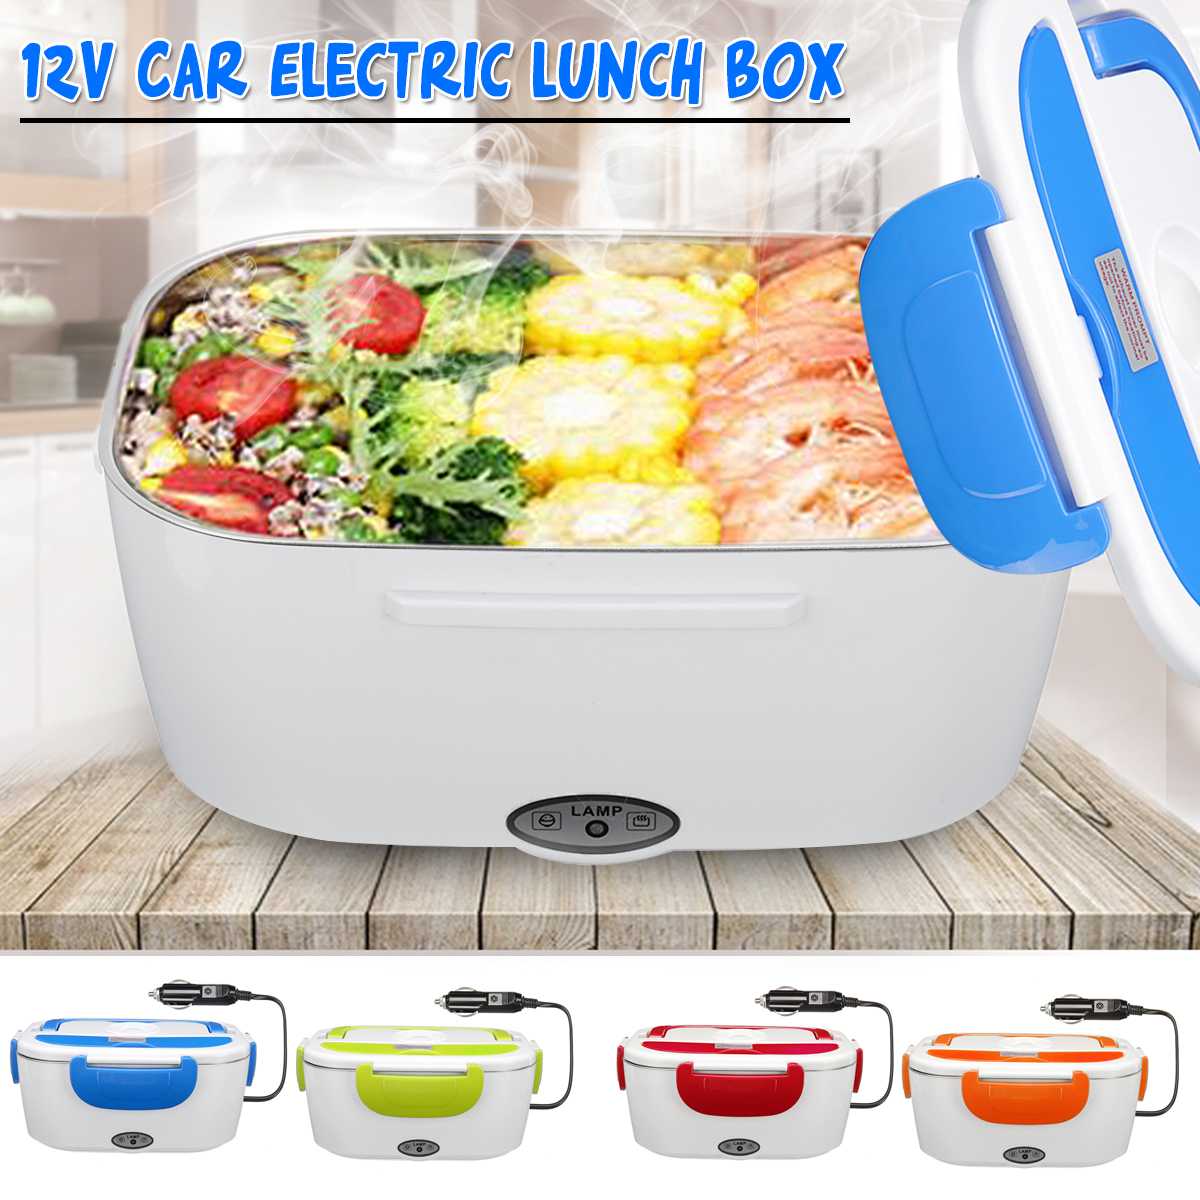 VOVOIR 12V Electric Heating Lunch Box Thermal Bento Box Food Heater Warmer 